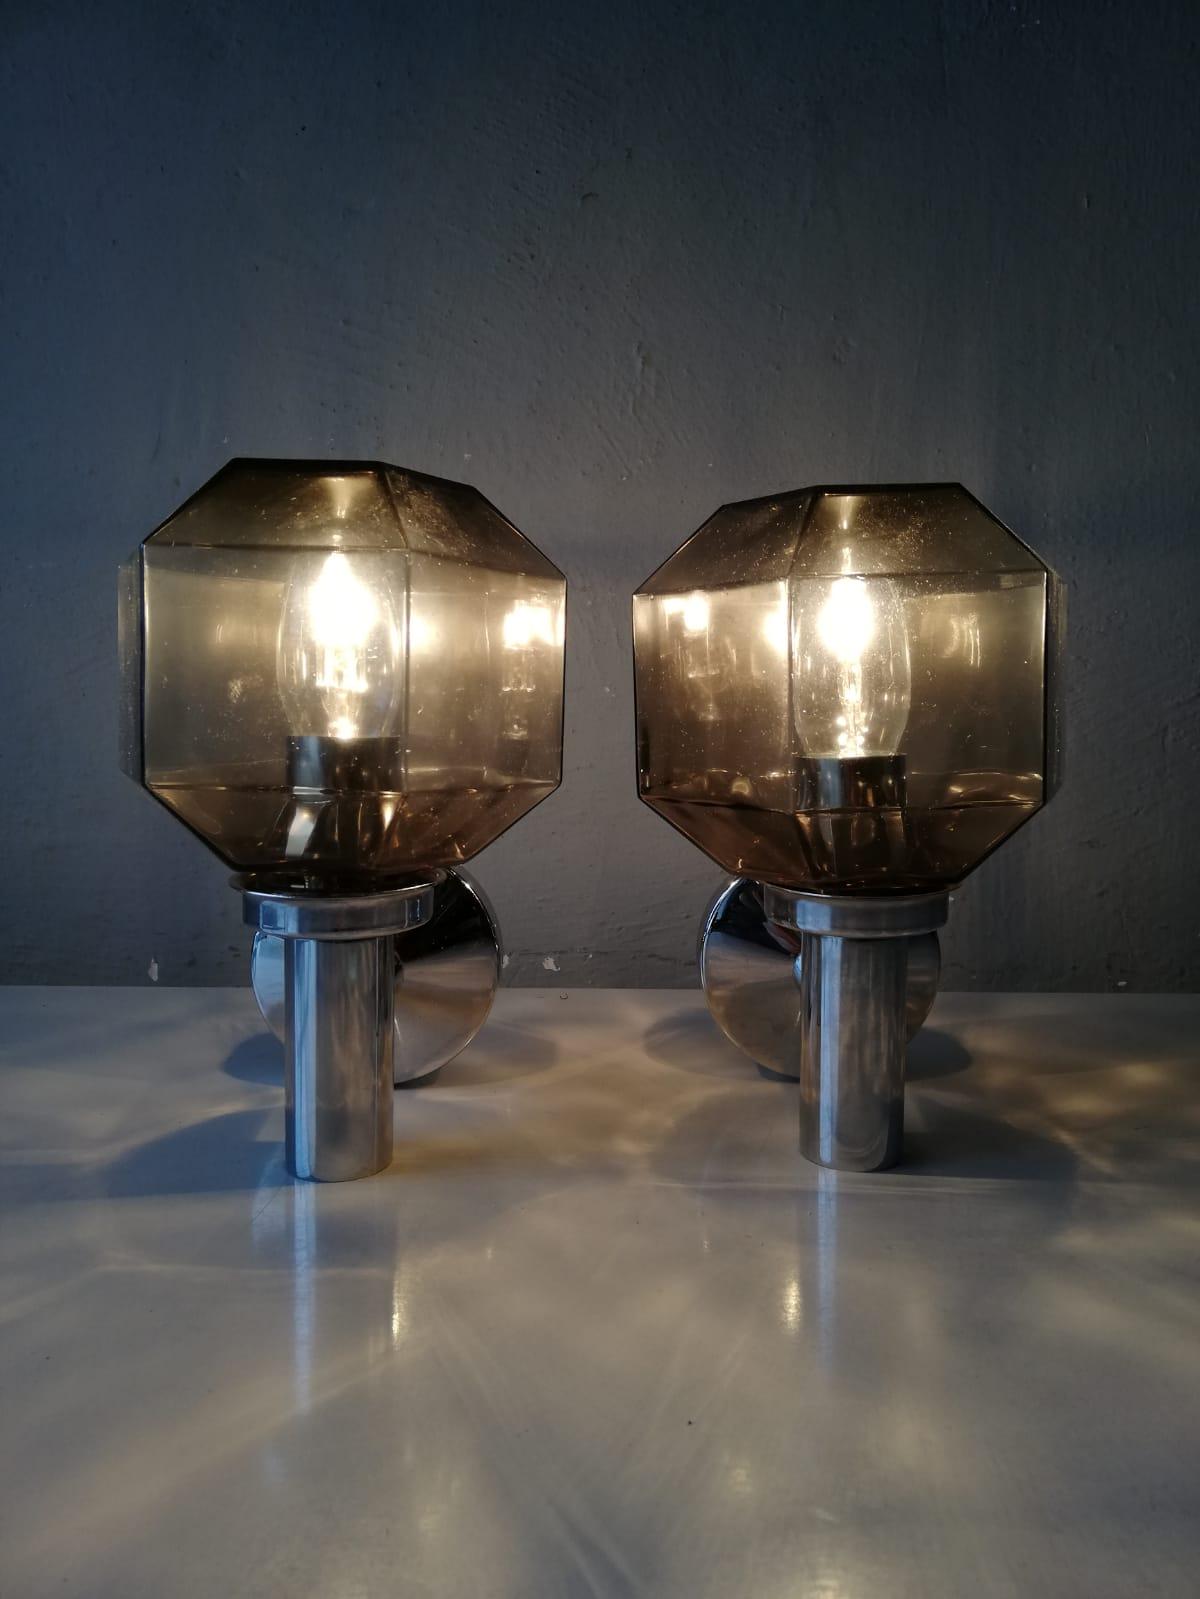 Mid-20th Century Smoke Glass and Chrome Body Sconces by Hillebrand, 1960s Germany